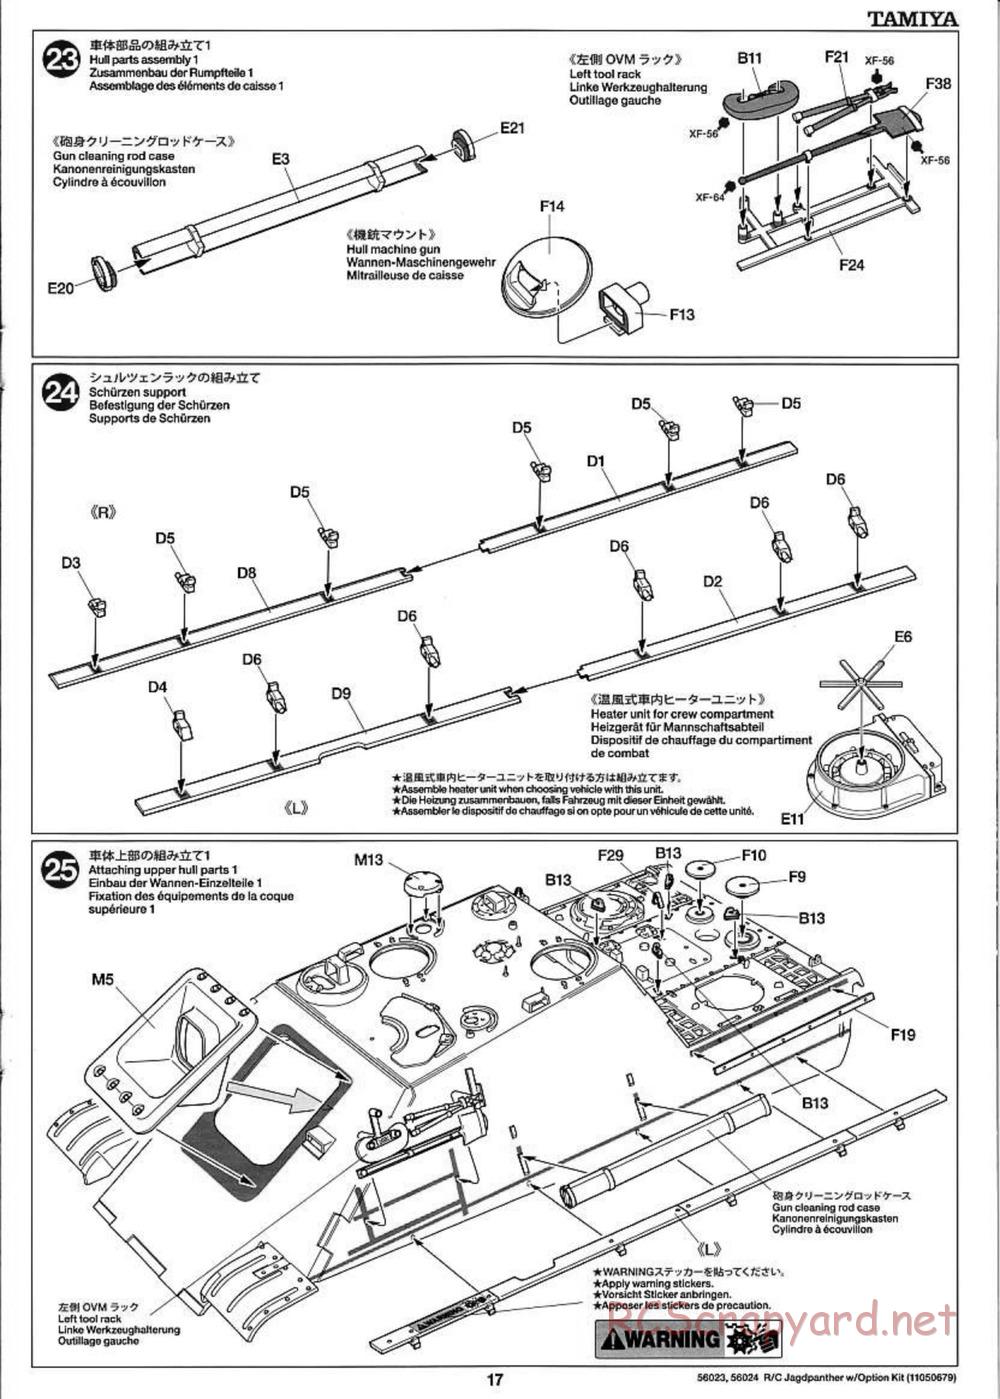 Tamiya - Jagdpanther - 1/16 Scale Chassis - Manual - Page 17